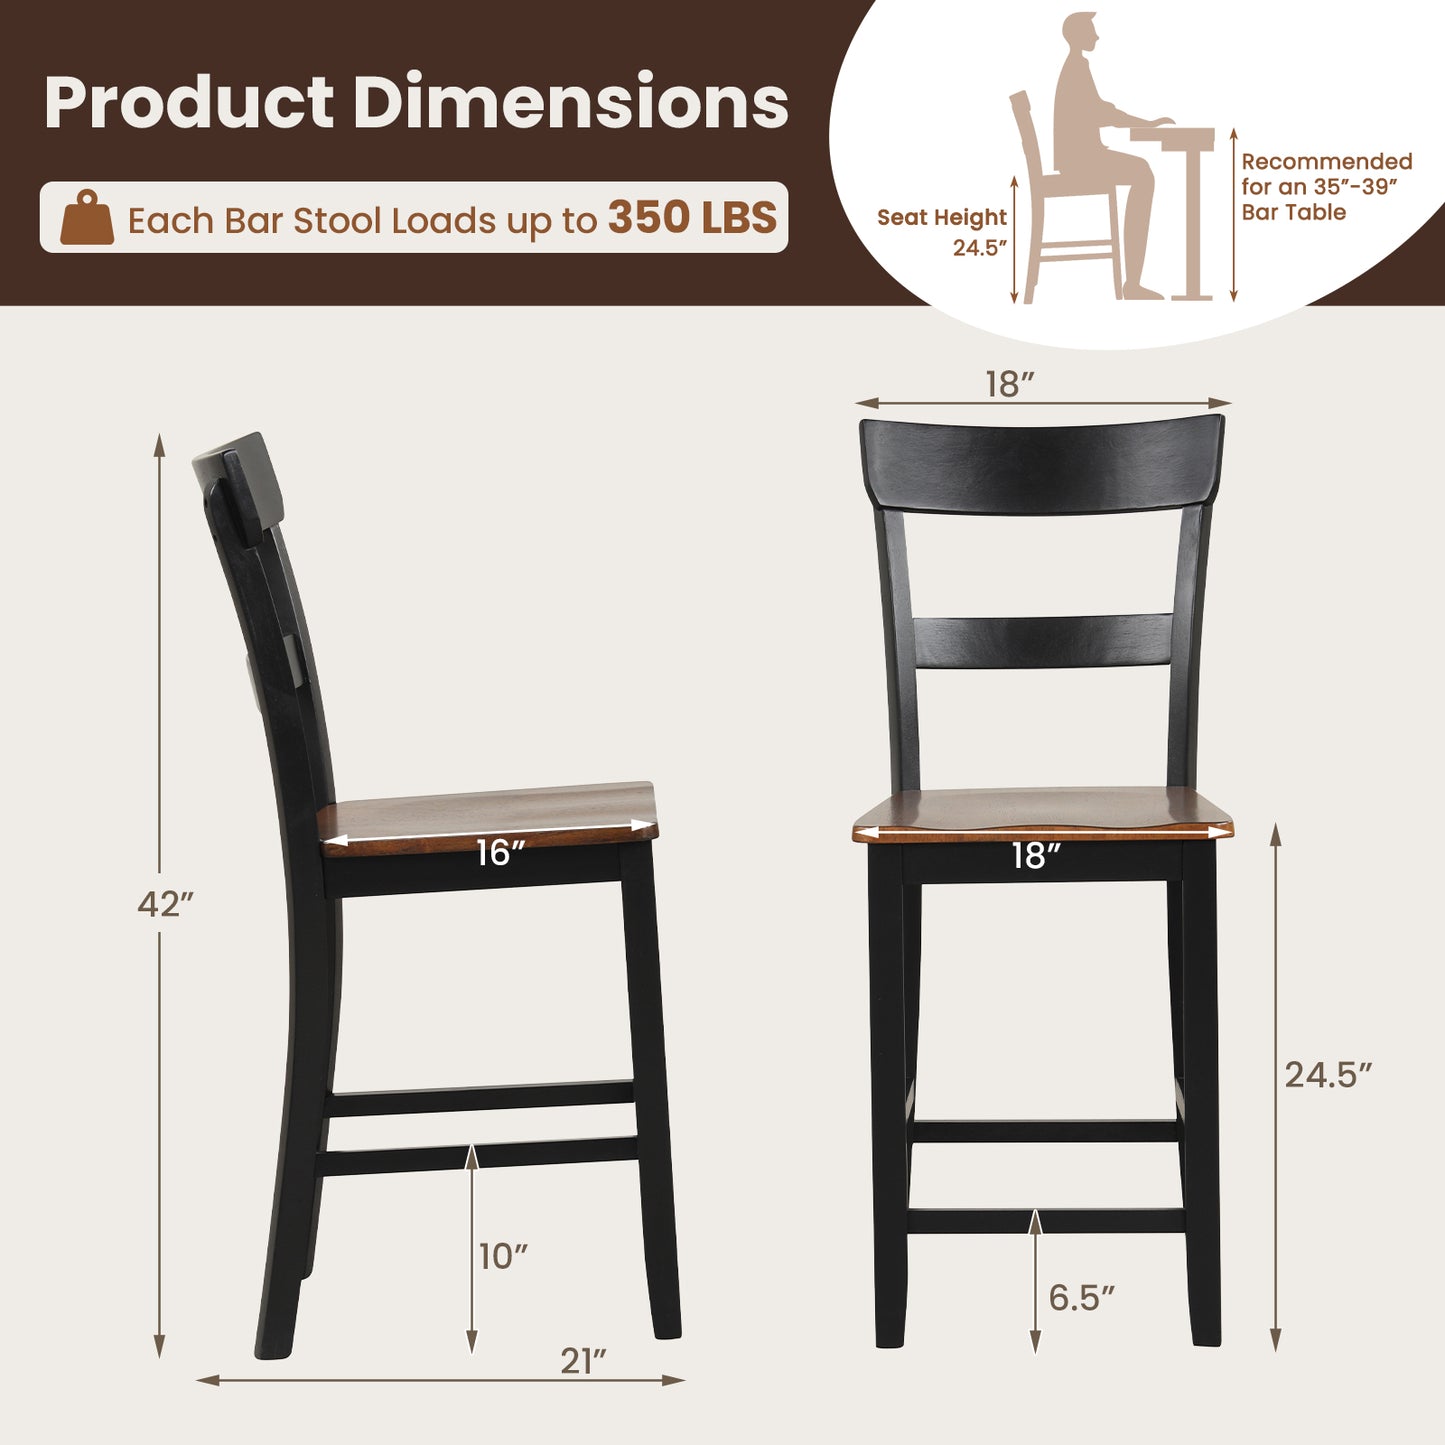 Farmhouse Dining Bar Stool Set of 2 with Solid Rubber Wood Frame-Black